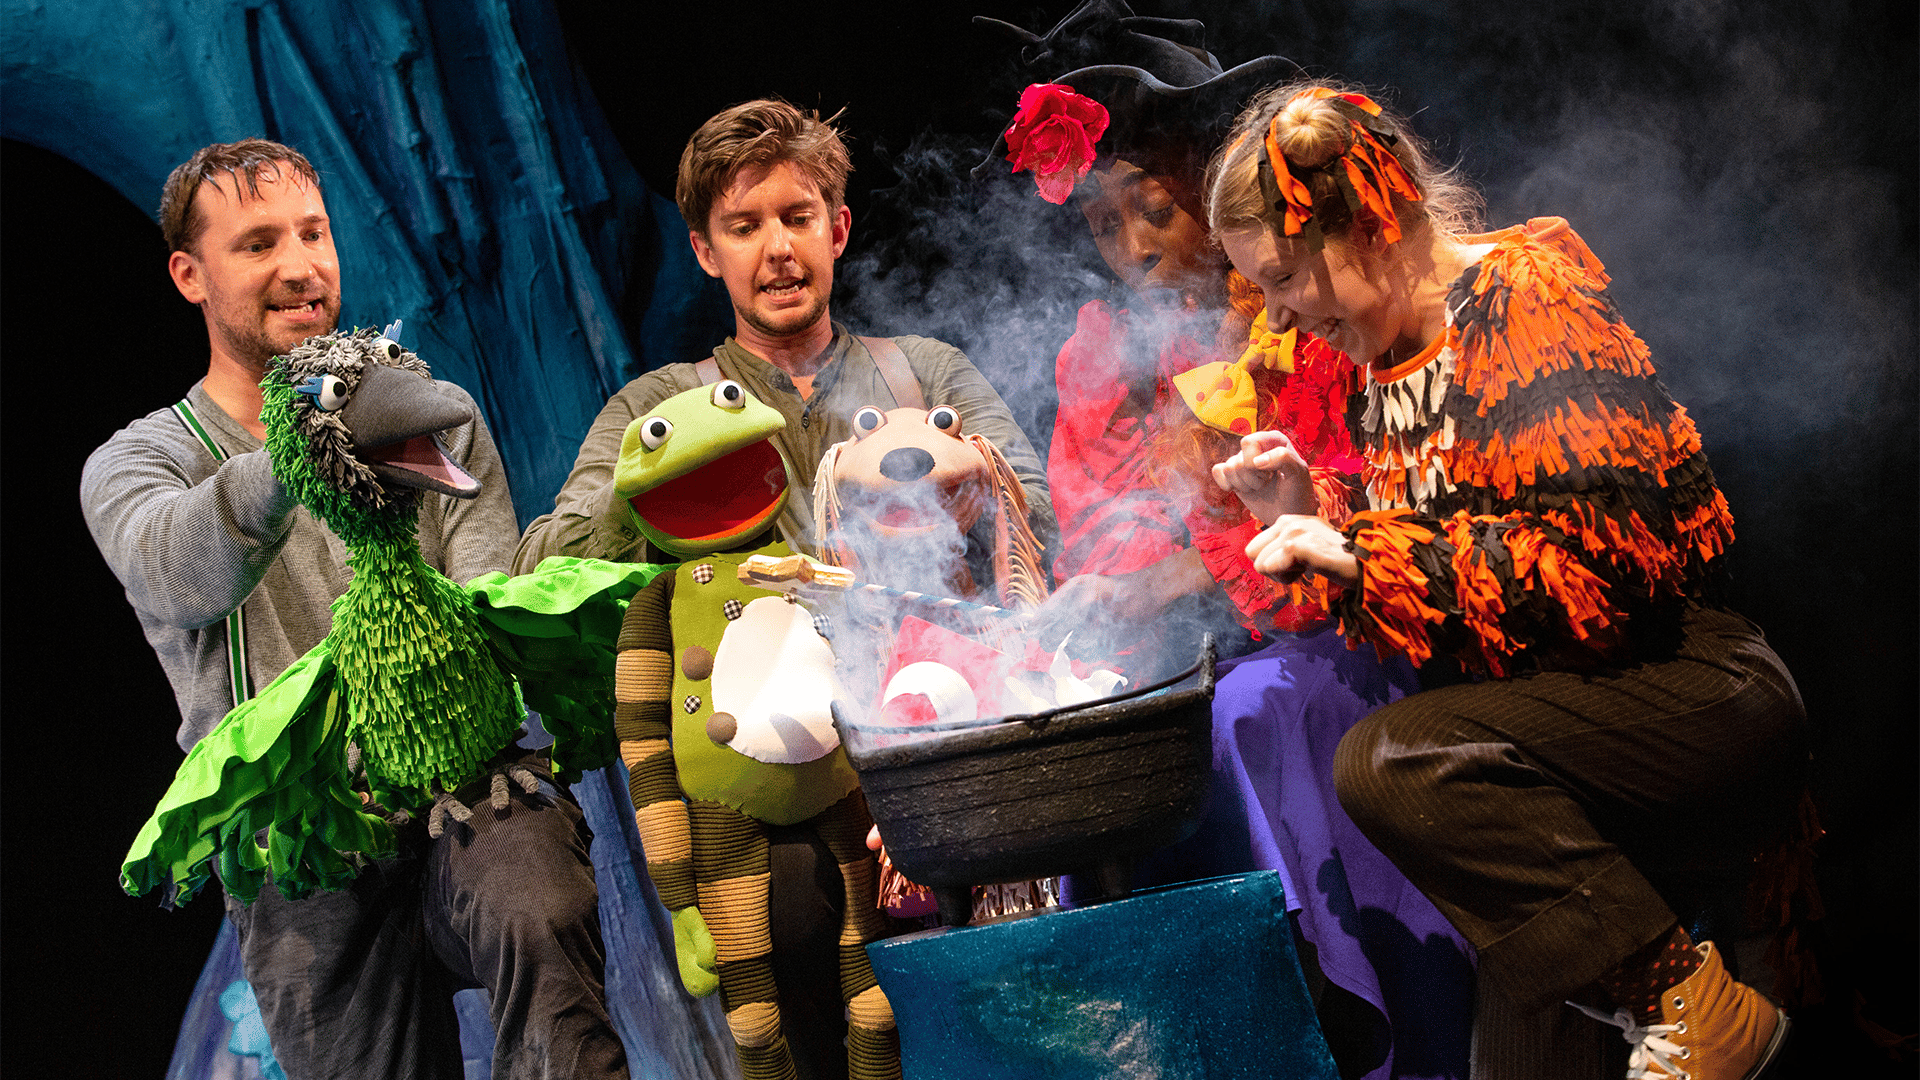 The witch, bird, frog, dog, cat and cast members gather around a smoking cauldron.